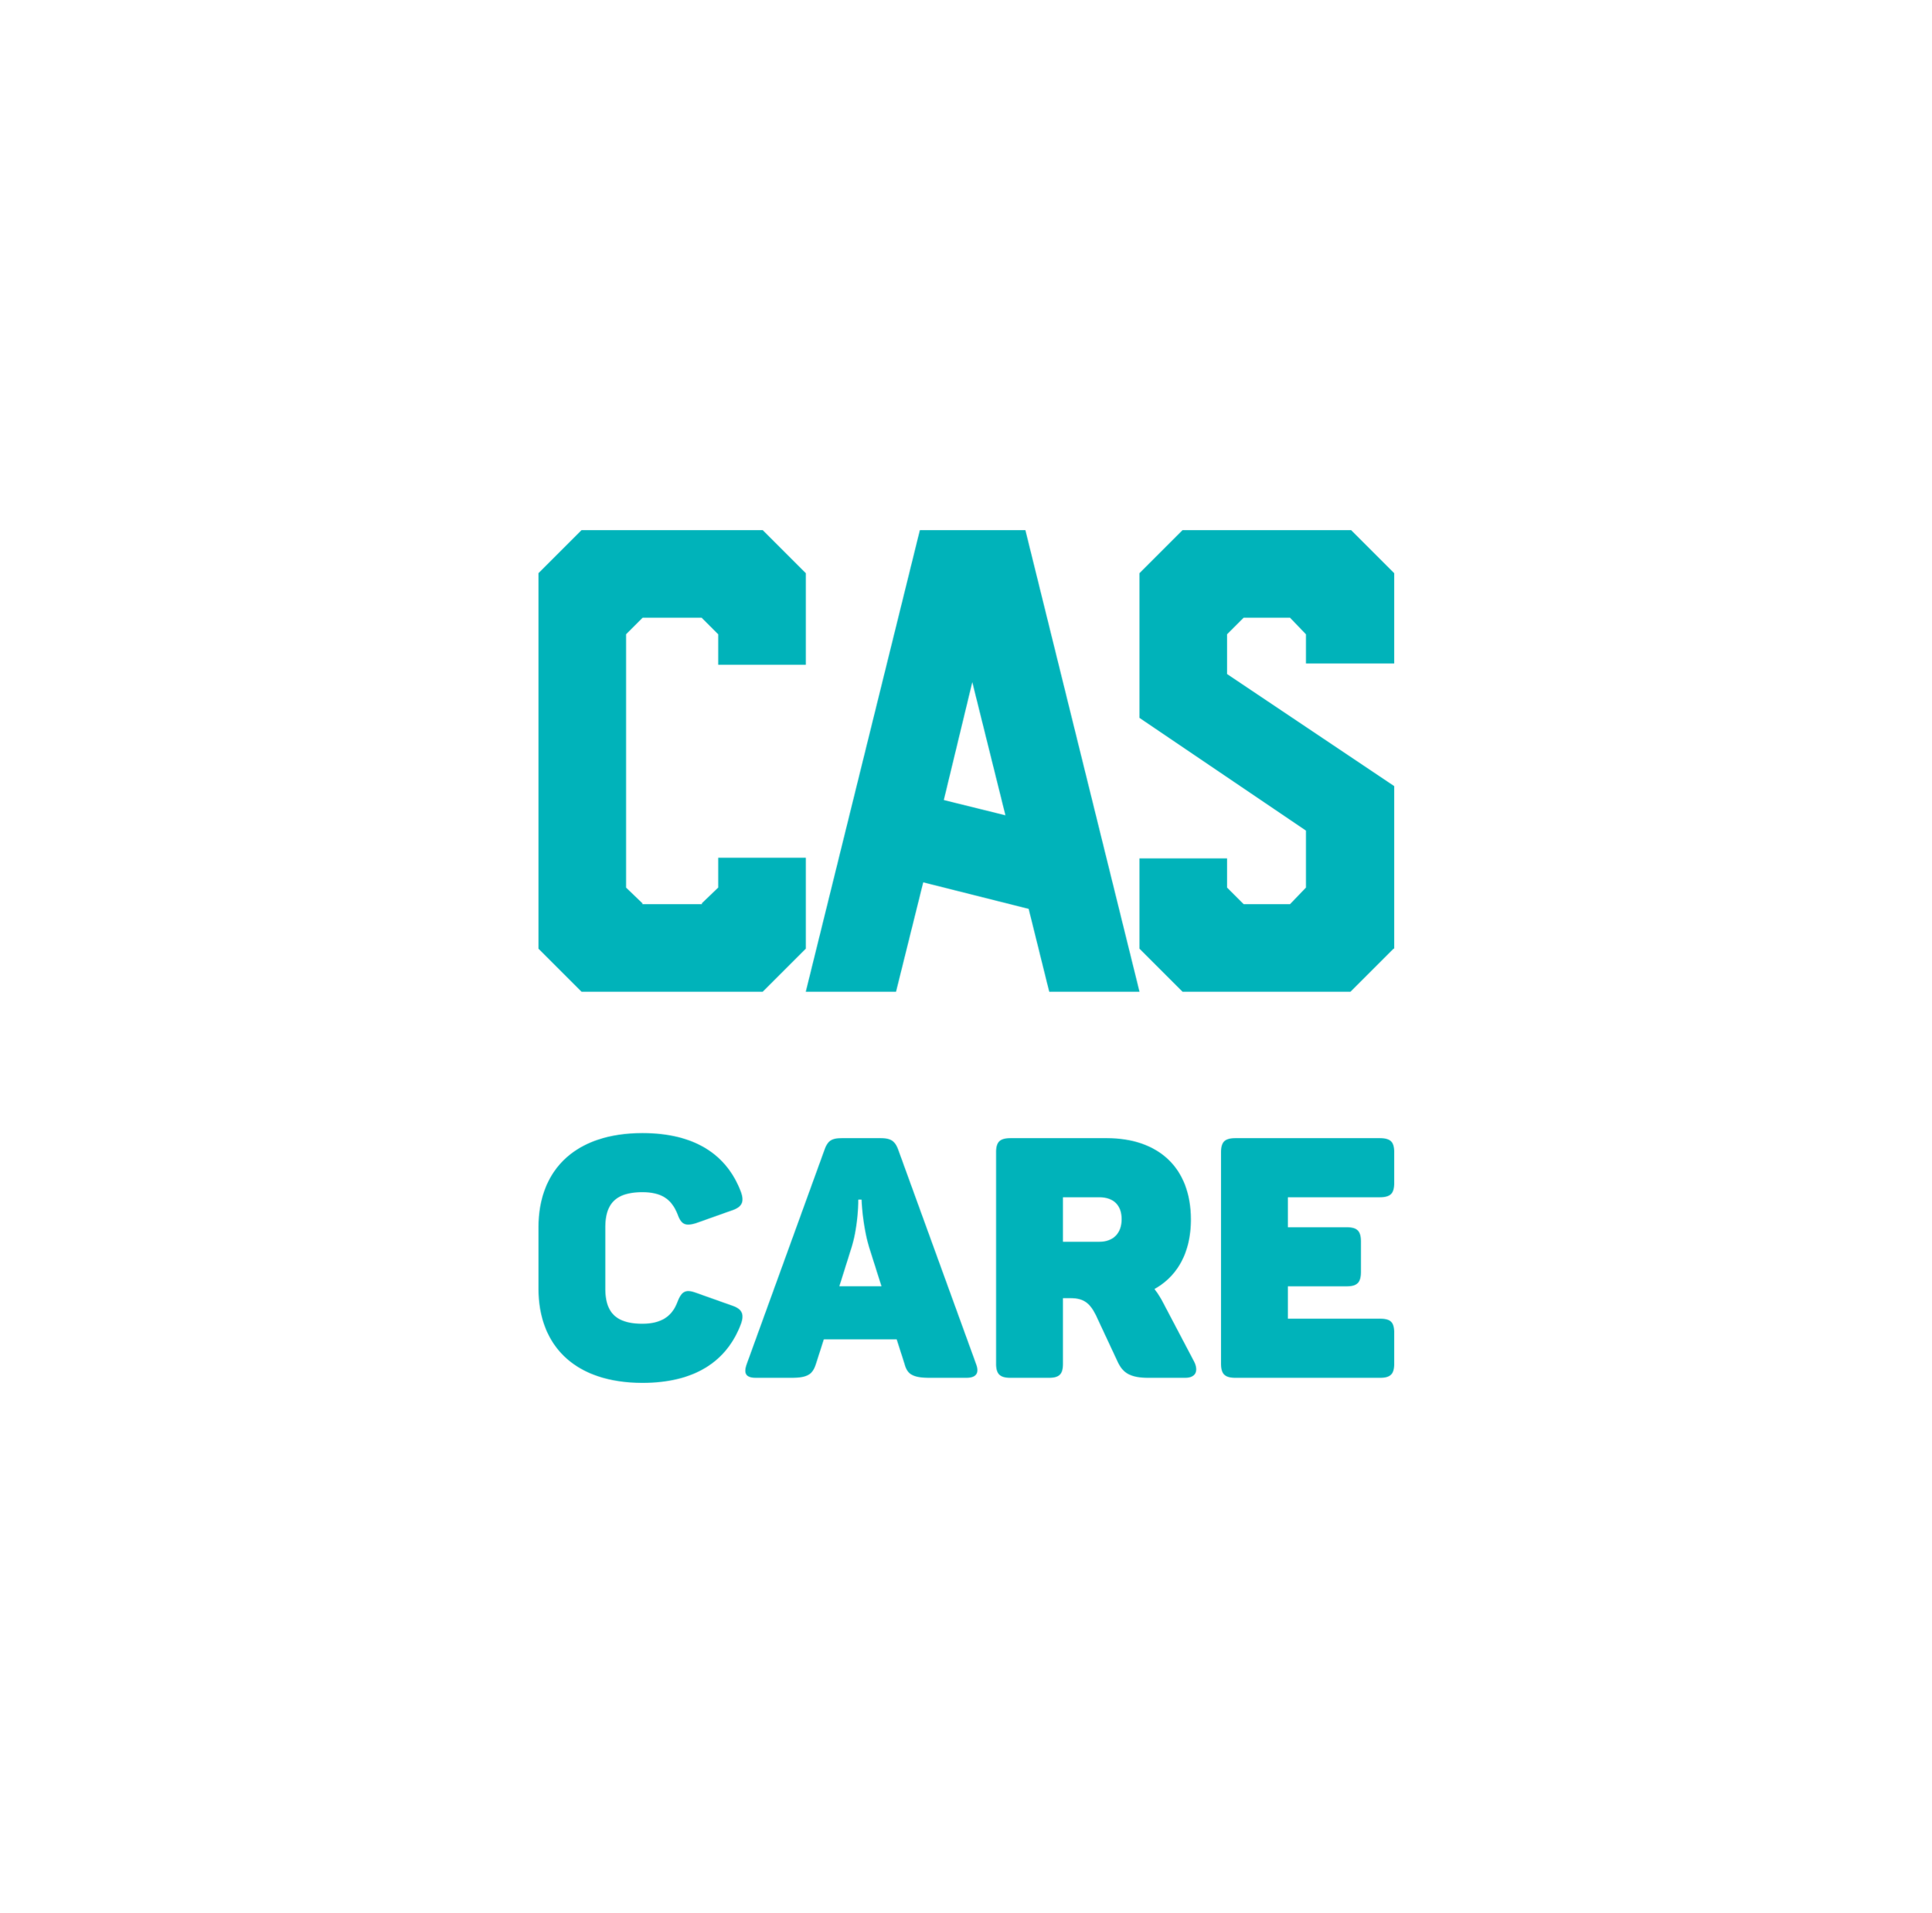 CAS-CARE_white-2.png